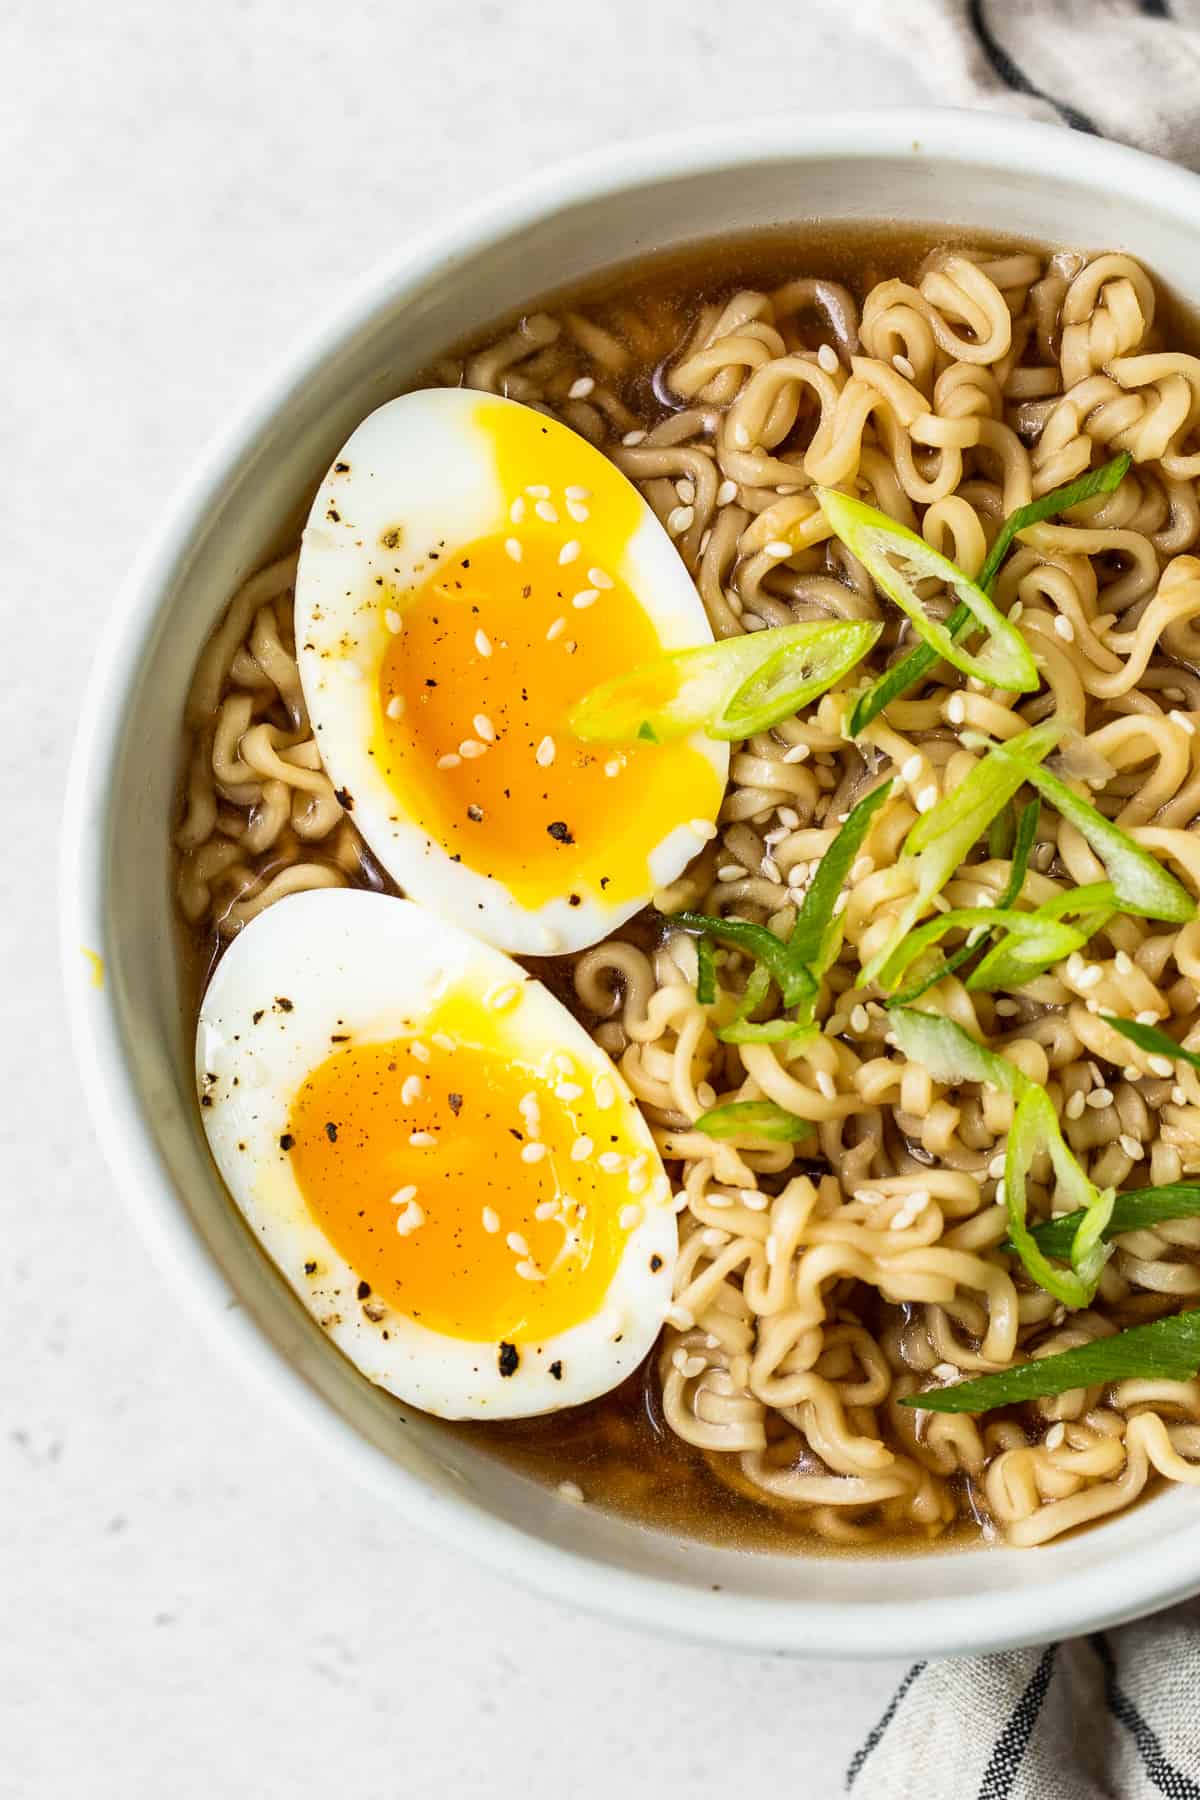 Soft boiled eggs in a bowl of ramen.